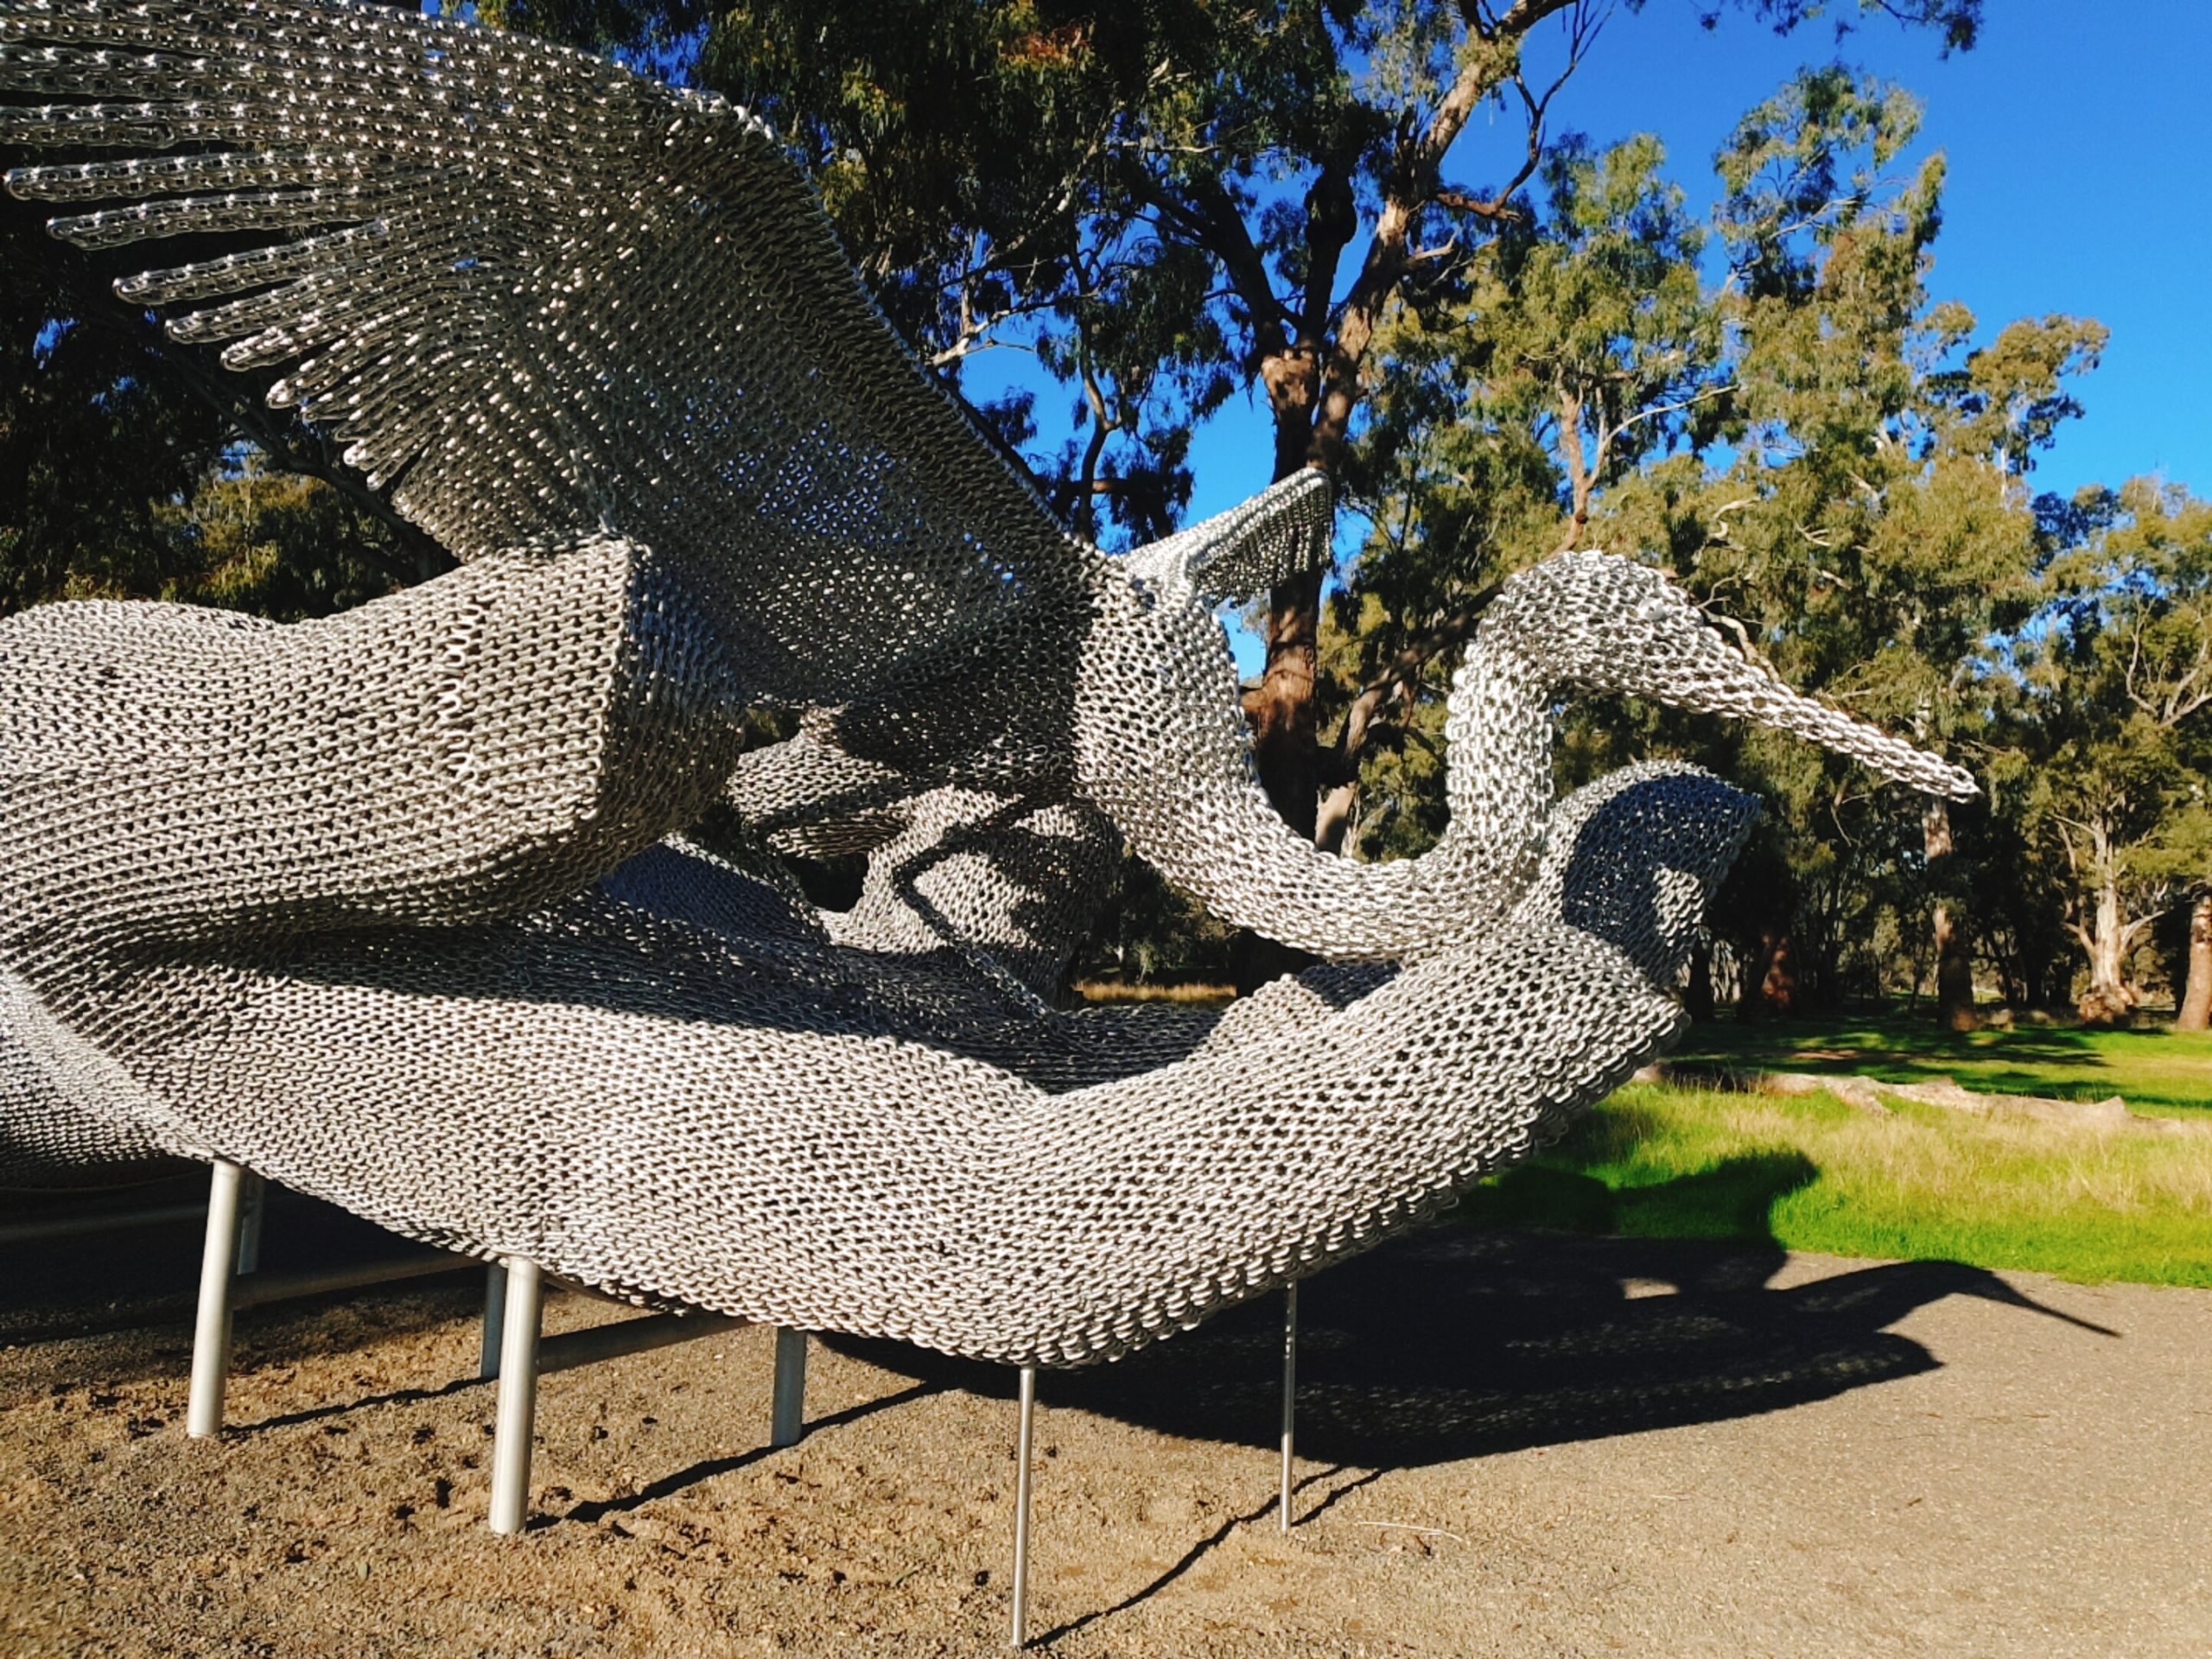 Sculpture Down the Lachlan